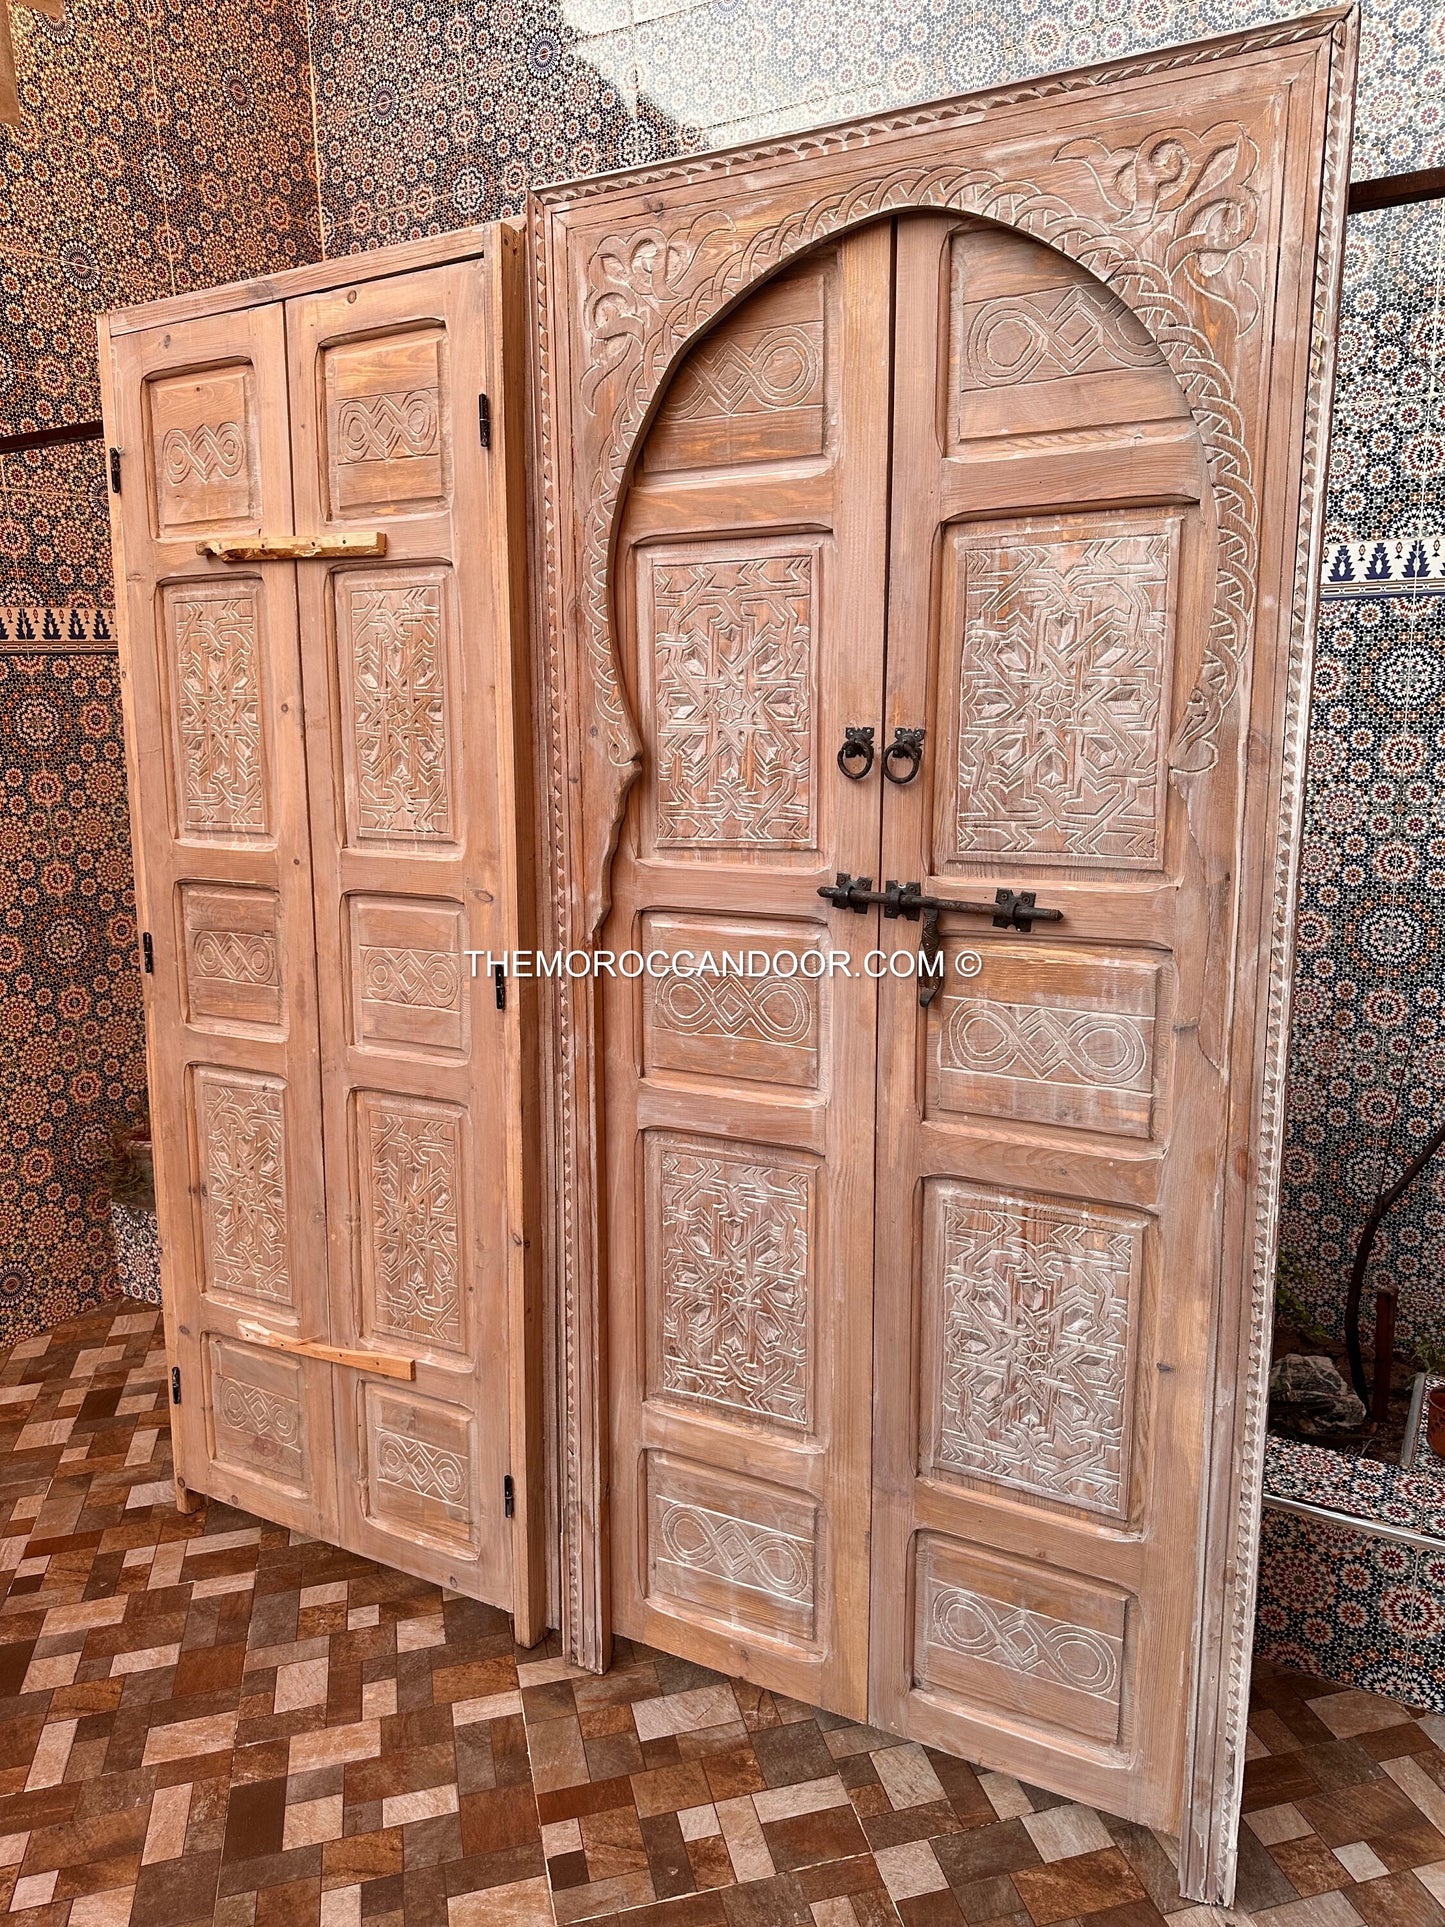 The tranquility and enchantment of Morocco enters your home through this exquisitely carved white door.